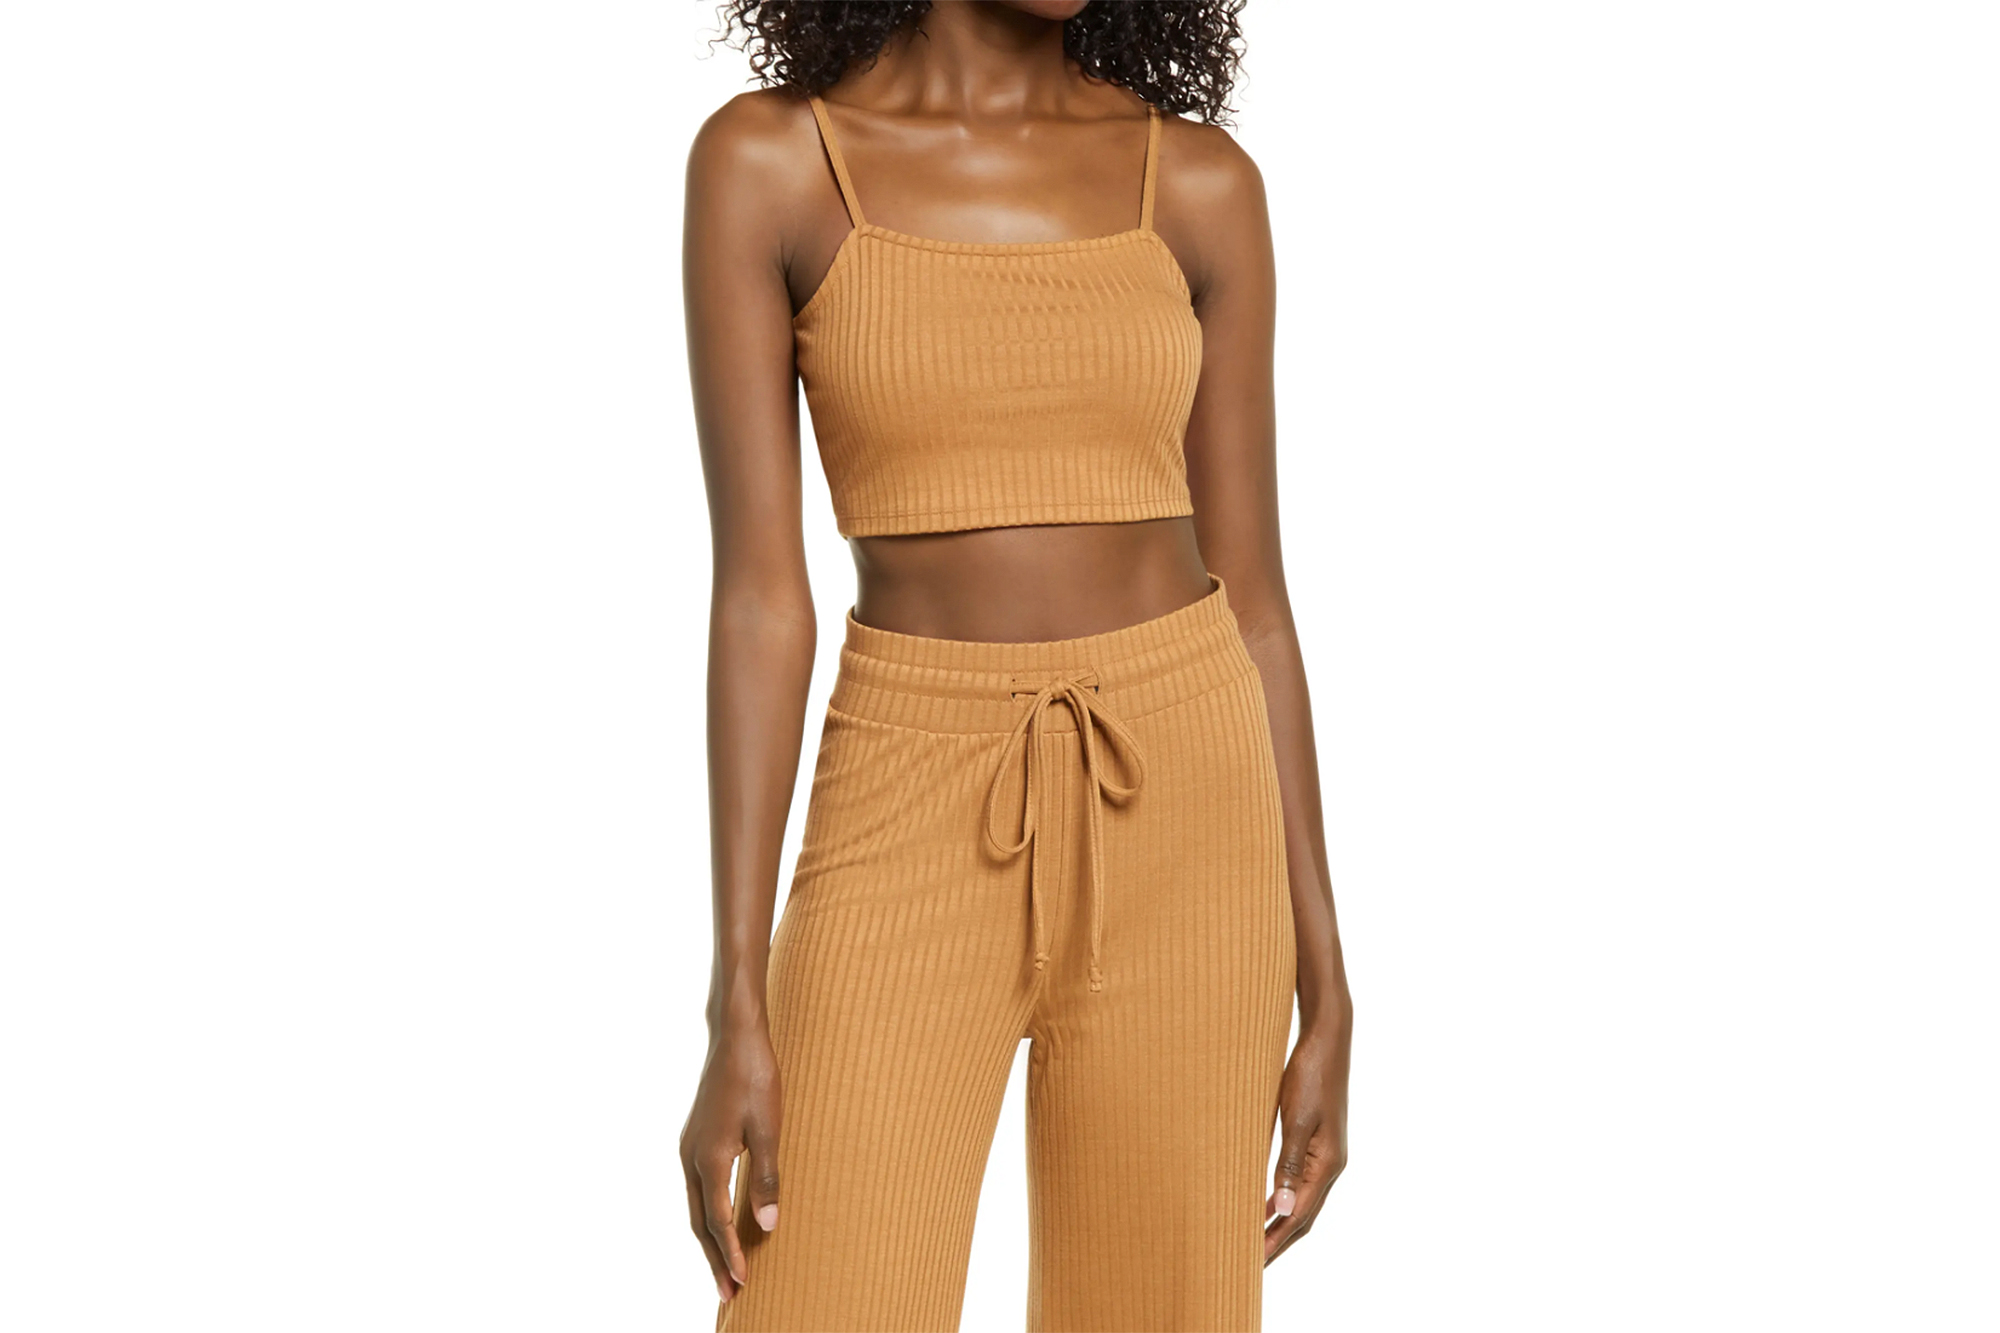 Sanders bud At bygge Nordstrom Anniversary Sale: The Best Ribbed Outfit Starting at $16